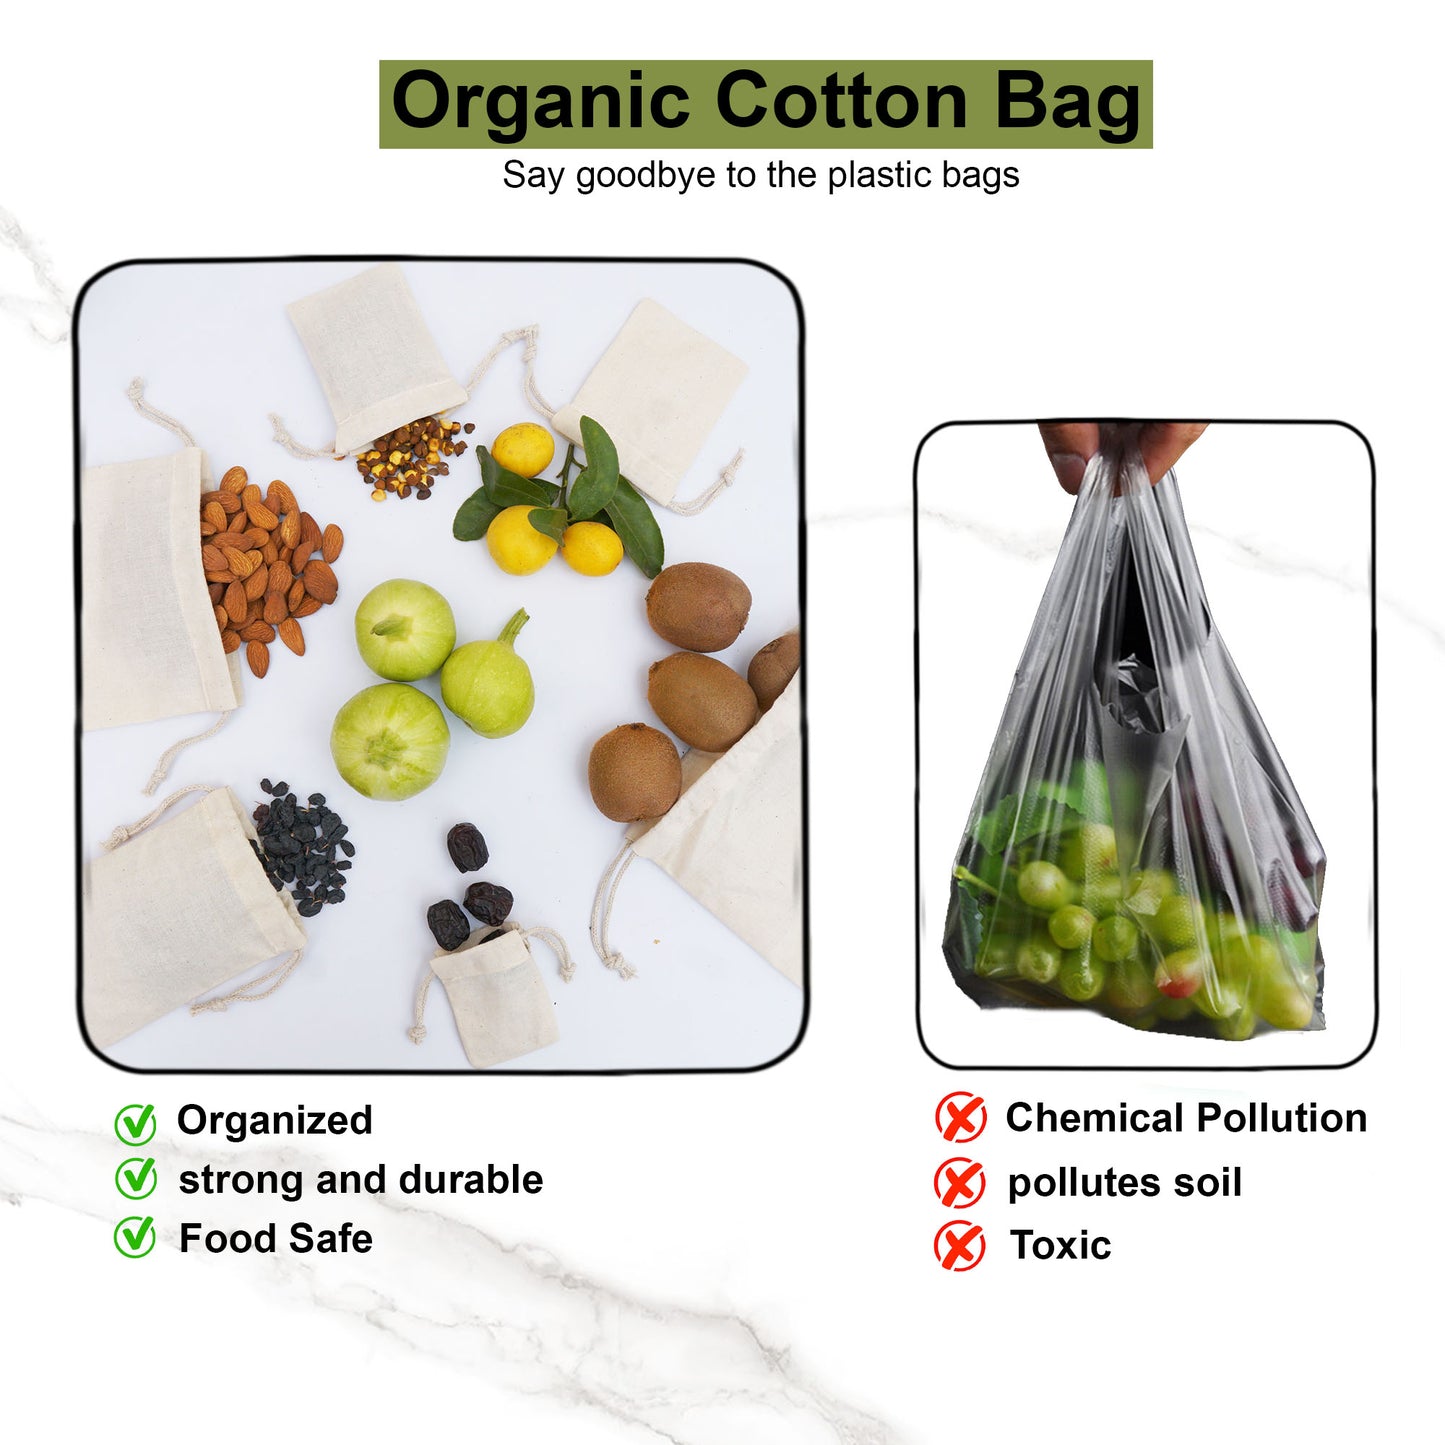 2x3 Inches Reusable Eco-Friendly Cotton Double Drawstring Bags Natural Color